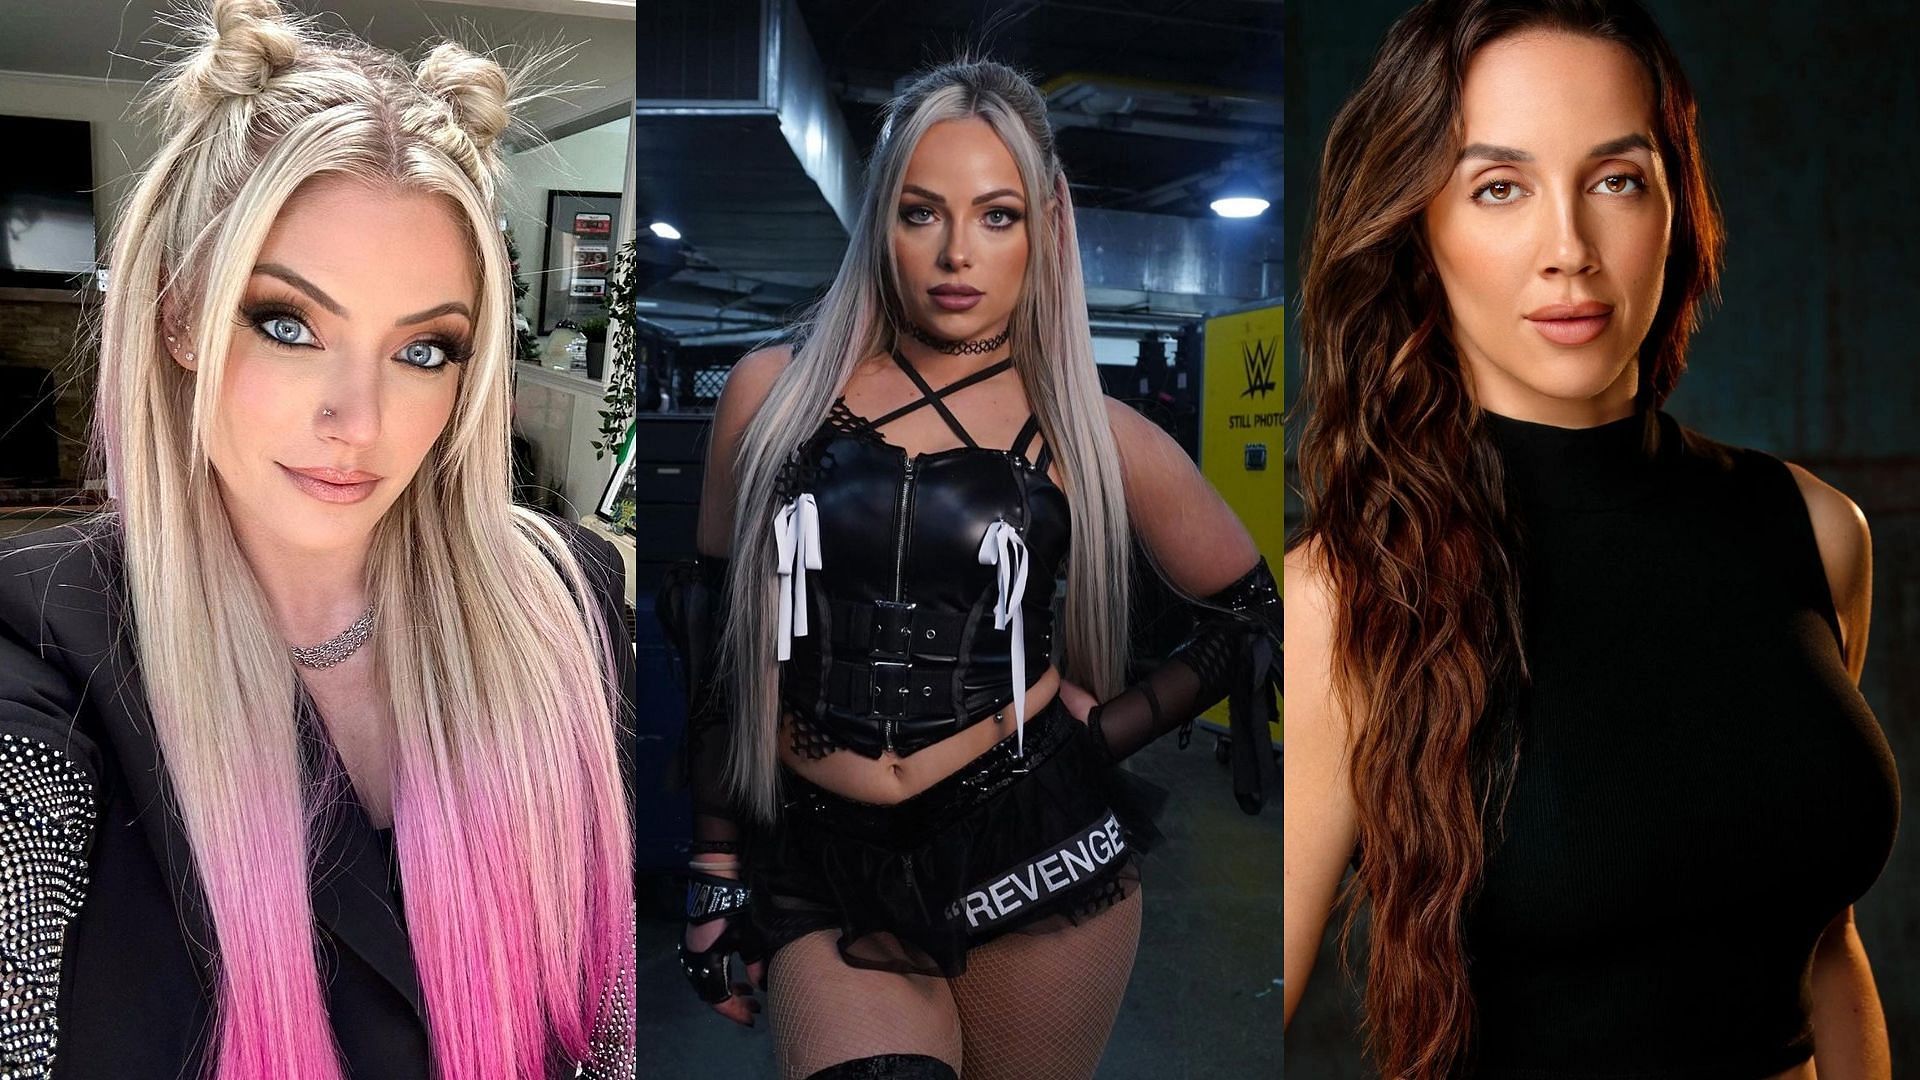 Alexa Bliss, Liv Morgan, and Chelsea Green (From left to right)